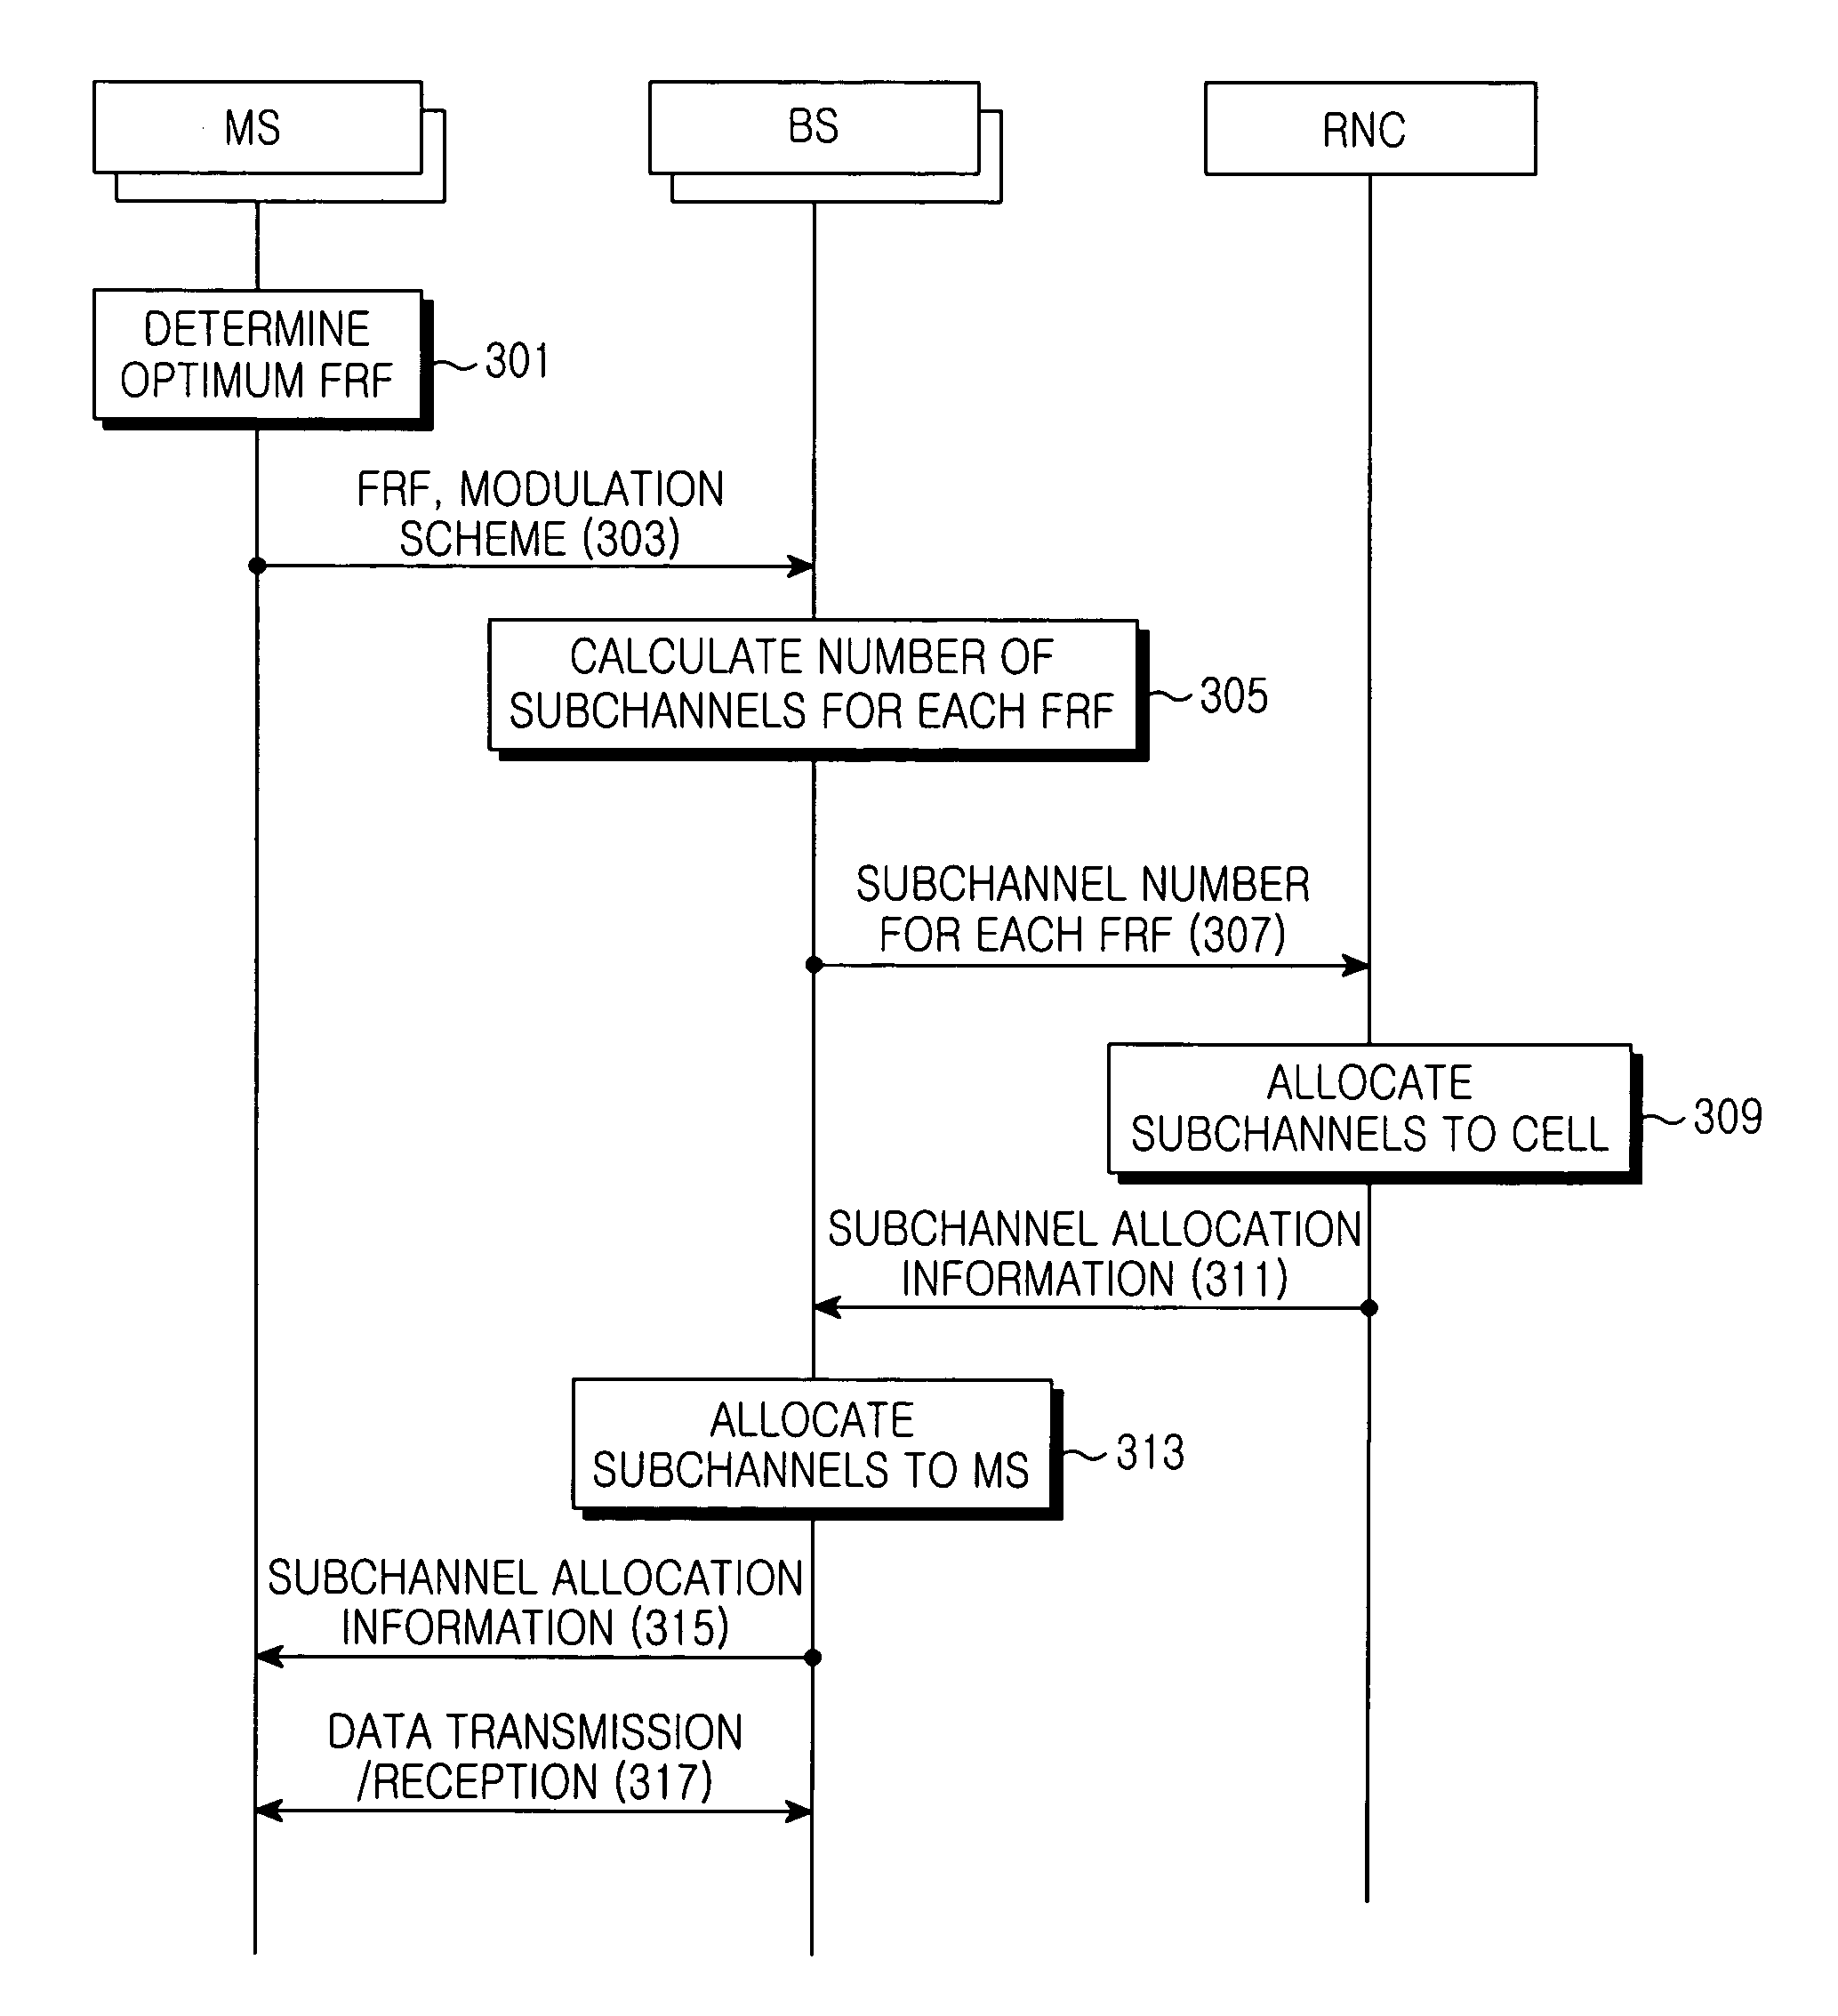 Apparatus and method for allocating subchannels adaptively according to frequency reuse rates in an orthogonal frequency division multiple access system